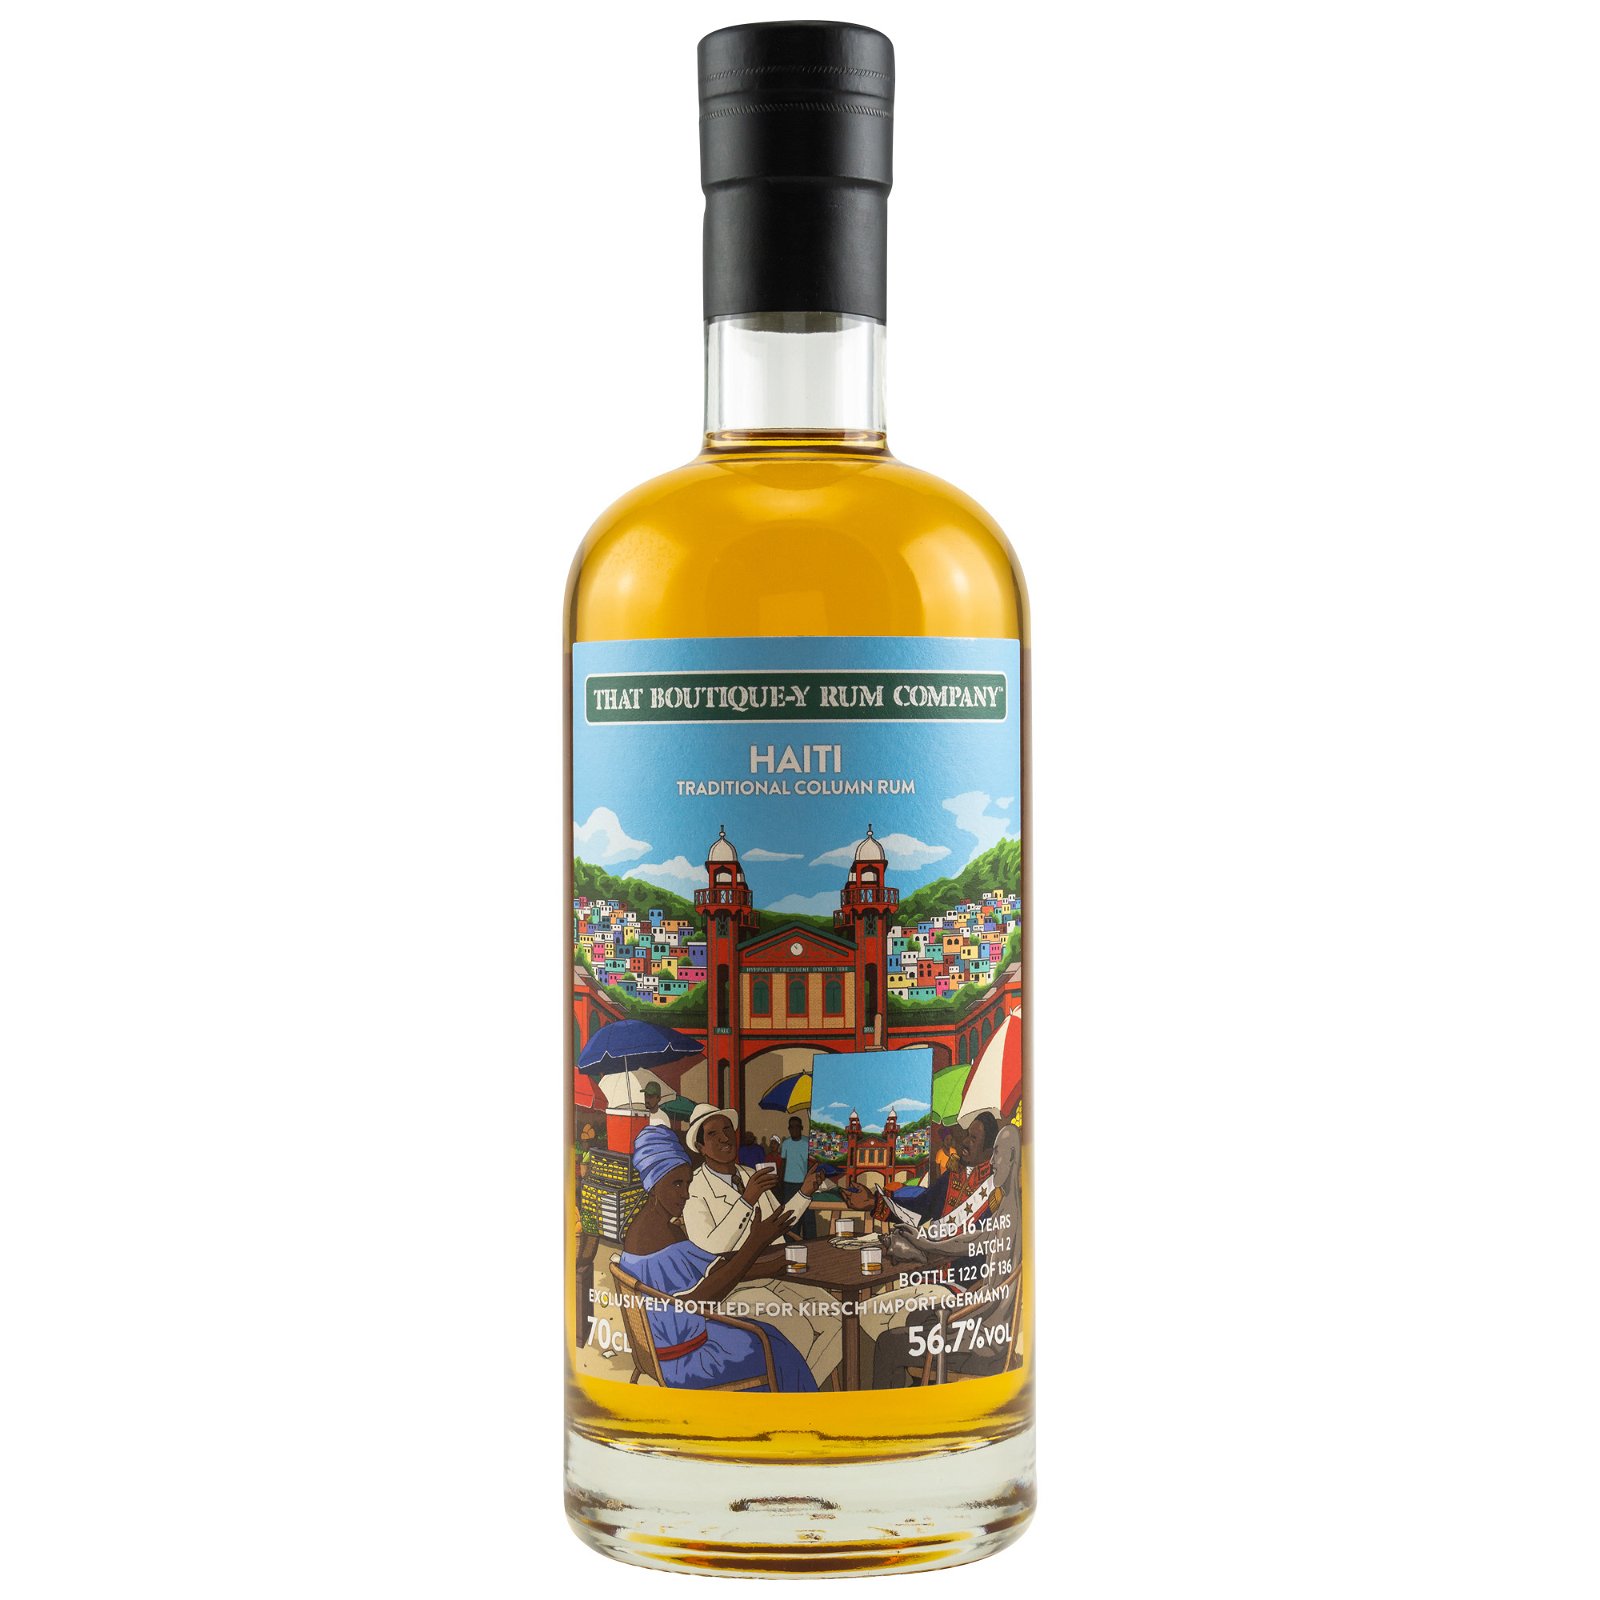 Haiti 16 Jahre Traditional Column Rum Batch 2 (That Boutique-y Rum Company) (Bottled for Kirsch Whisky)